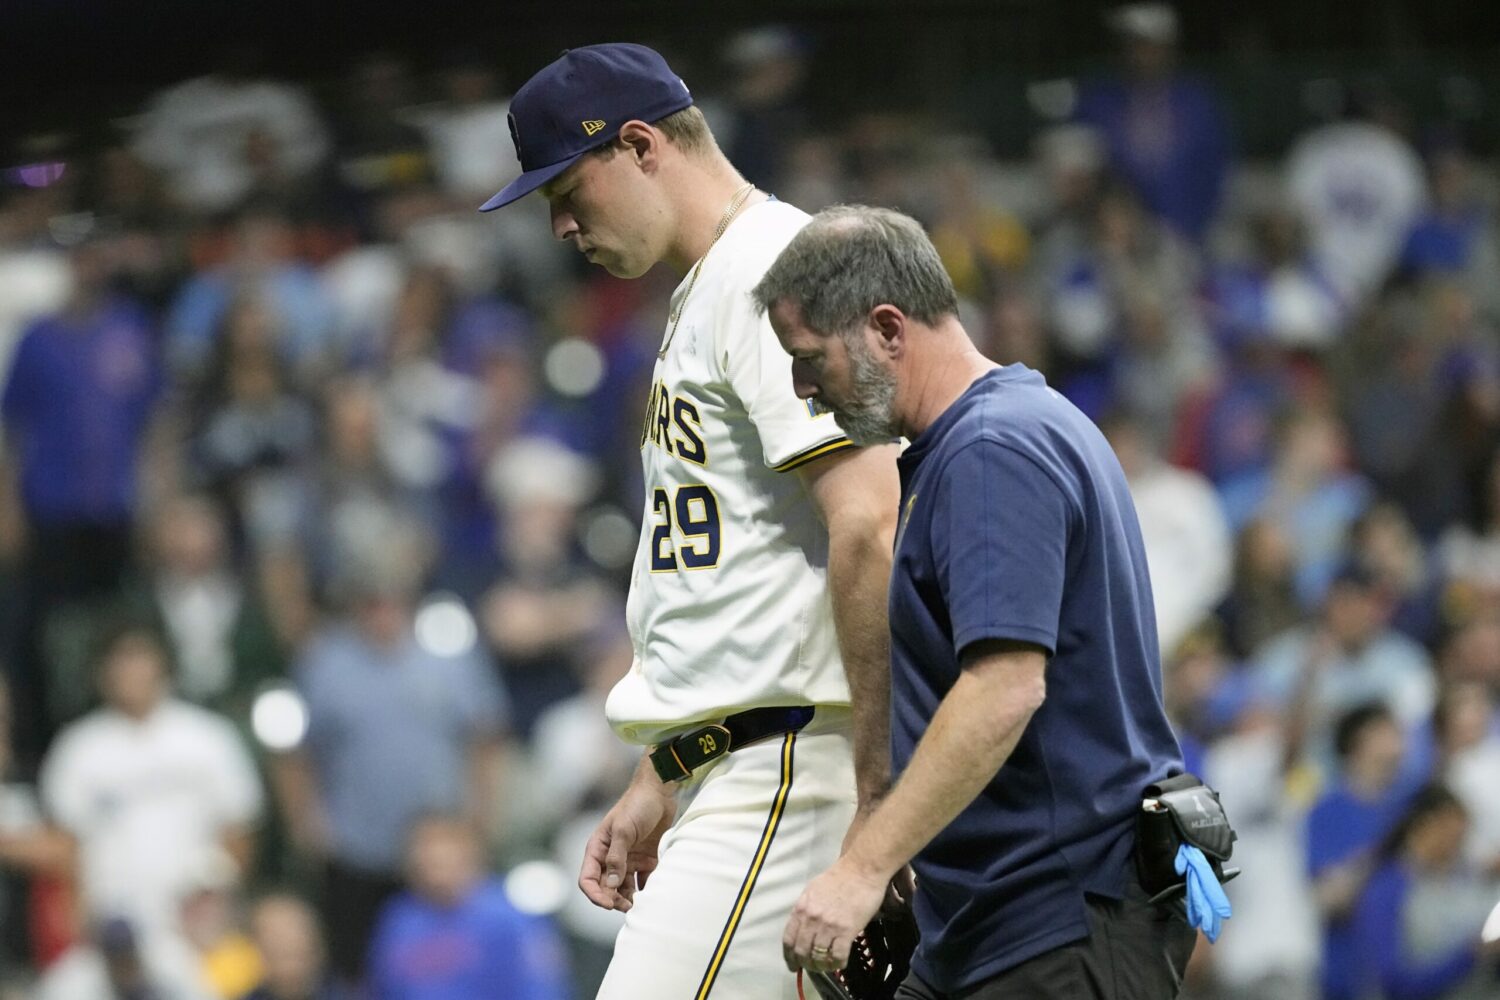 Milwaukee Brewers: Injury Woes Continue As Trevor Megill Took A 99 MPH Line Drive Off His Pitching Elbow